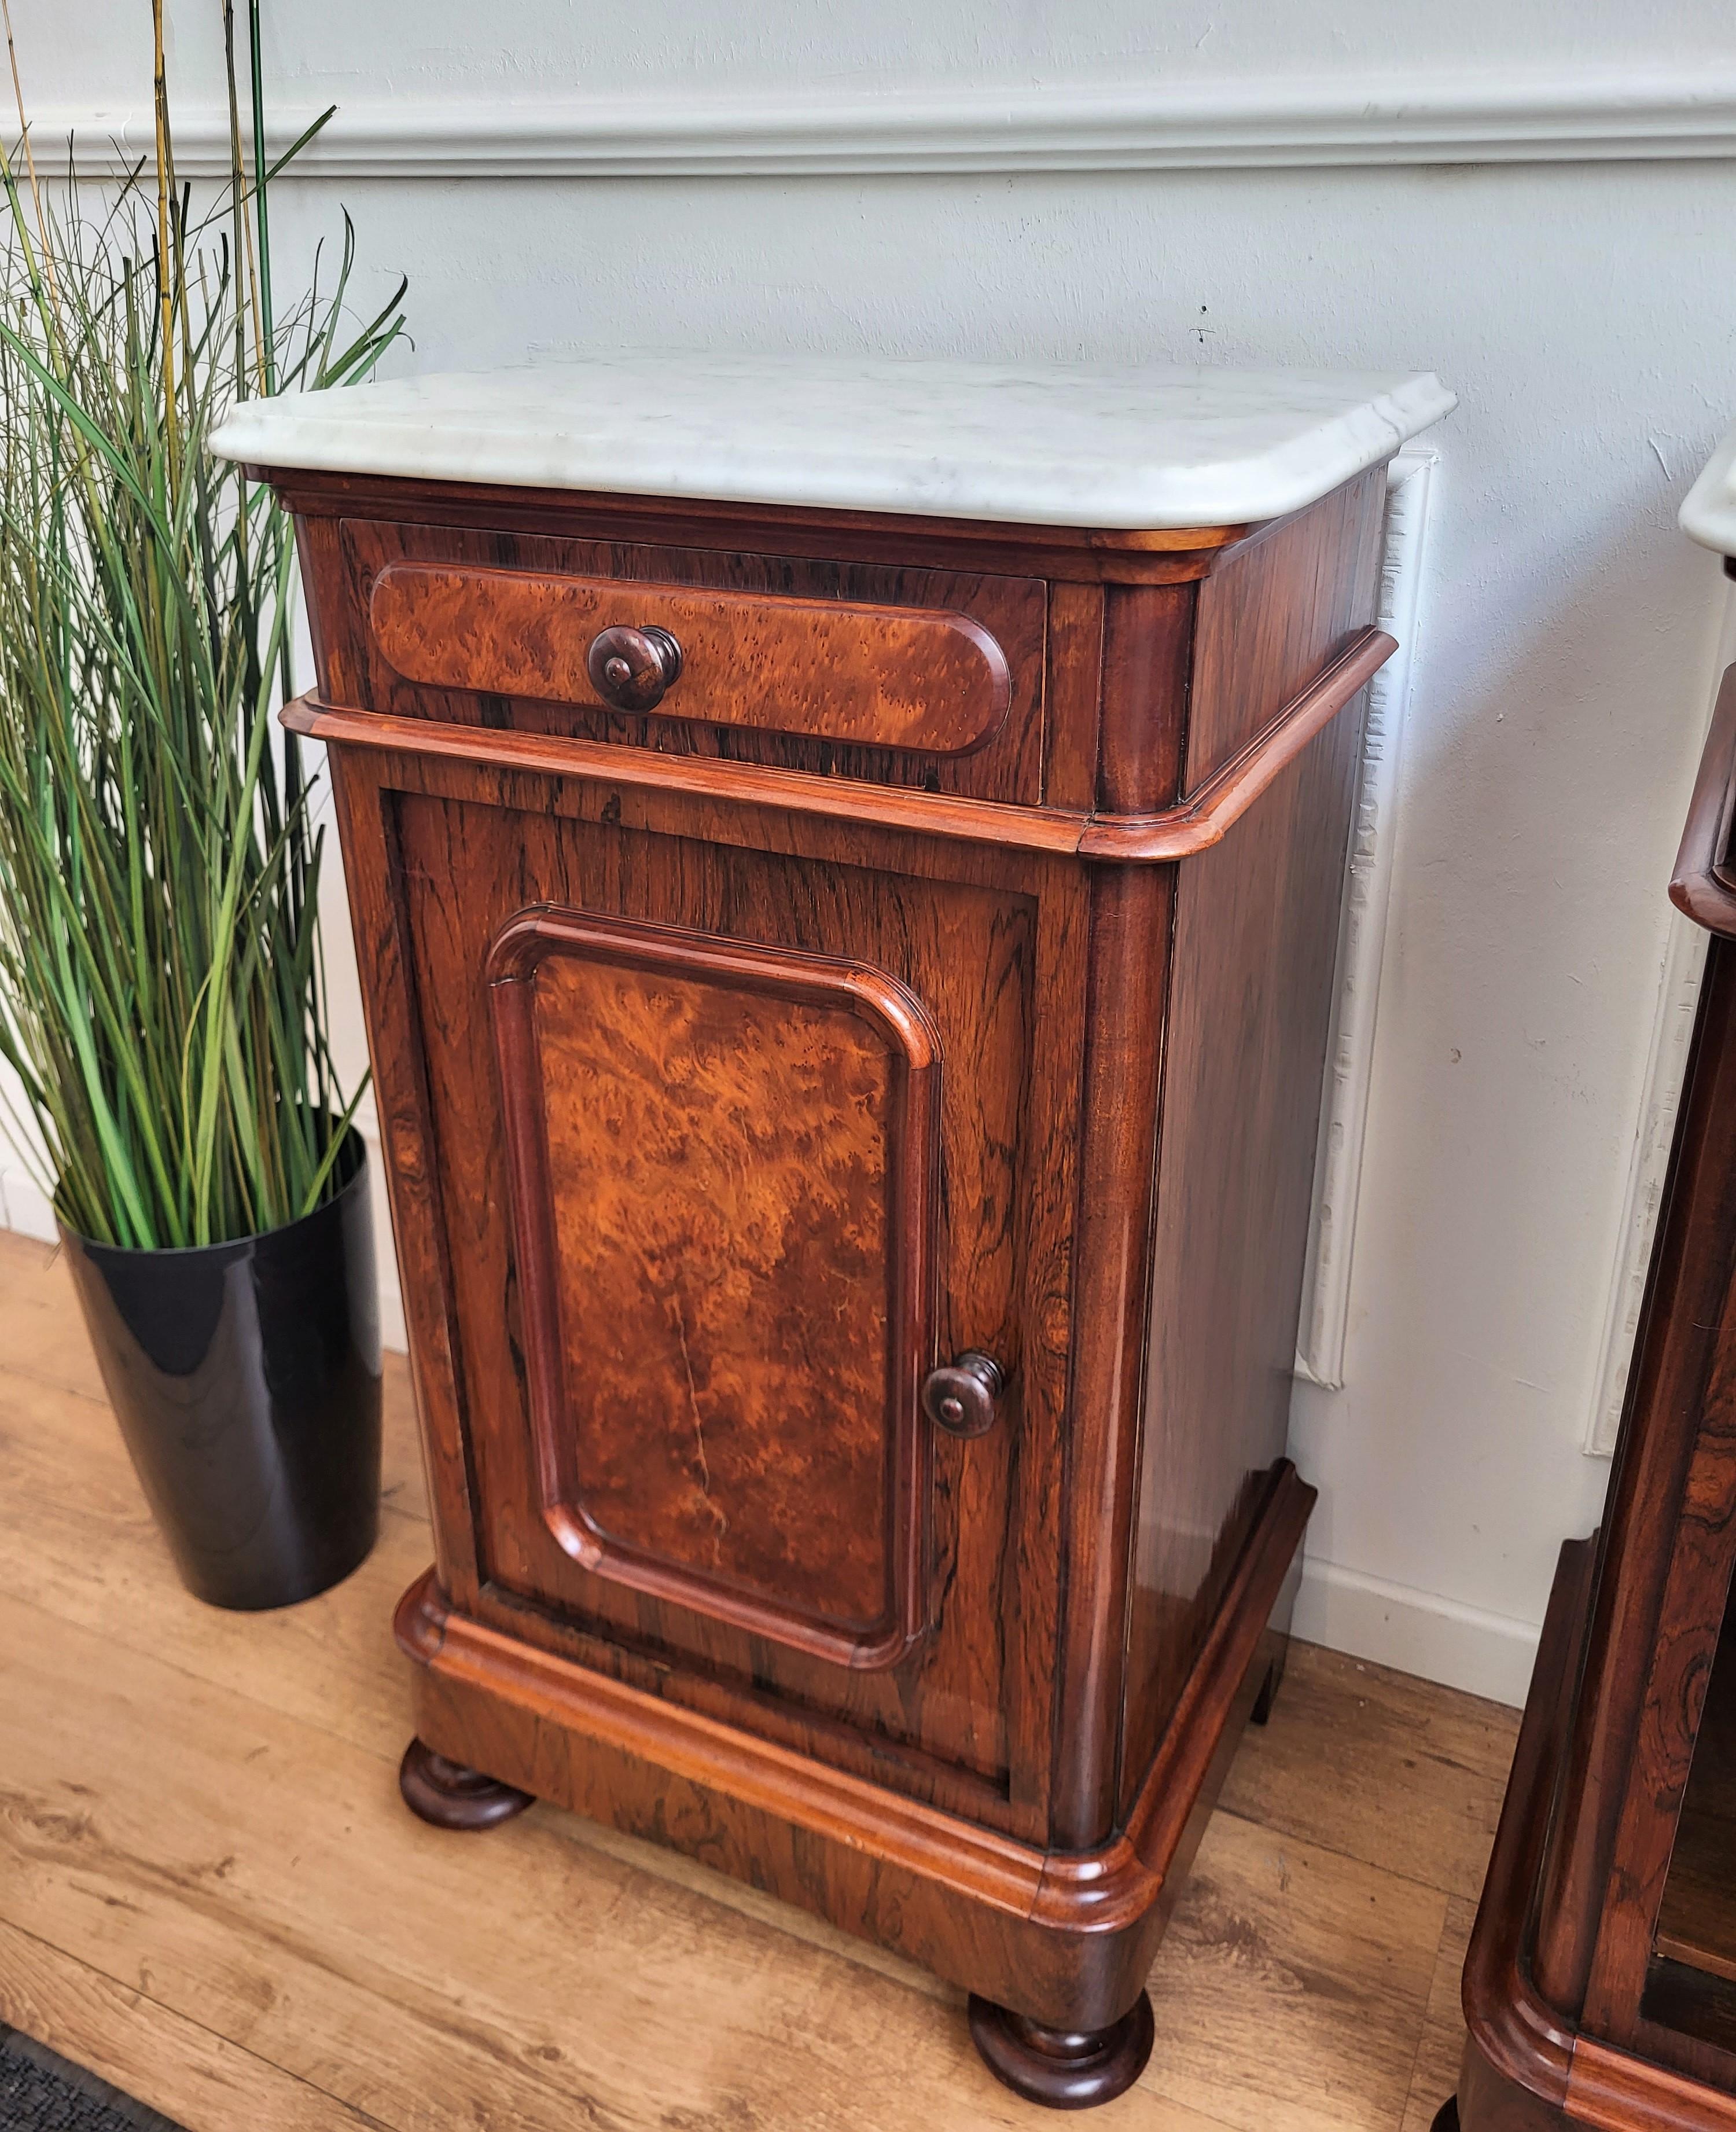 Pair of lovely antique Italian night stands or side tables with greatly carved doors and drawers and white beveled and shaped white carrara marble top. The nightstands have a door and drawer that are beautifully crafted and framed in the front with